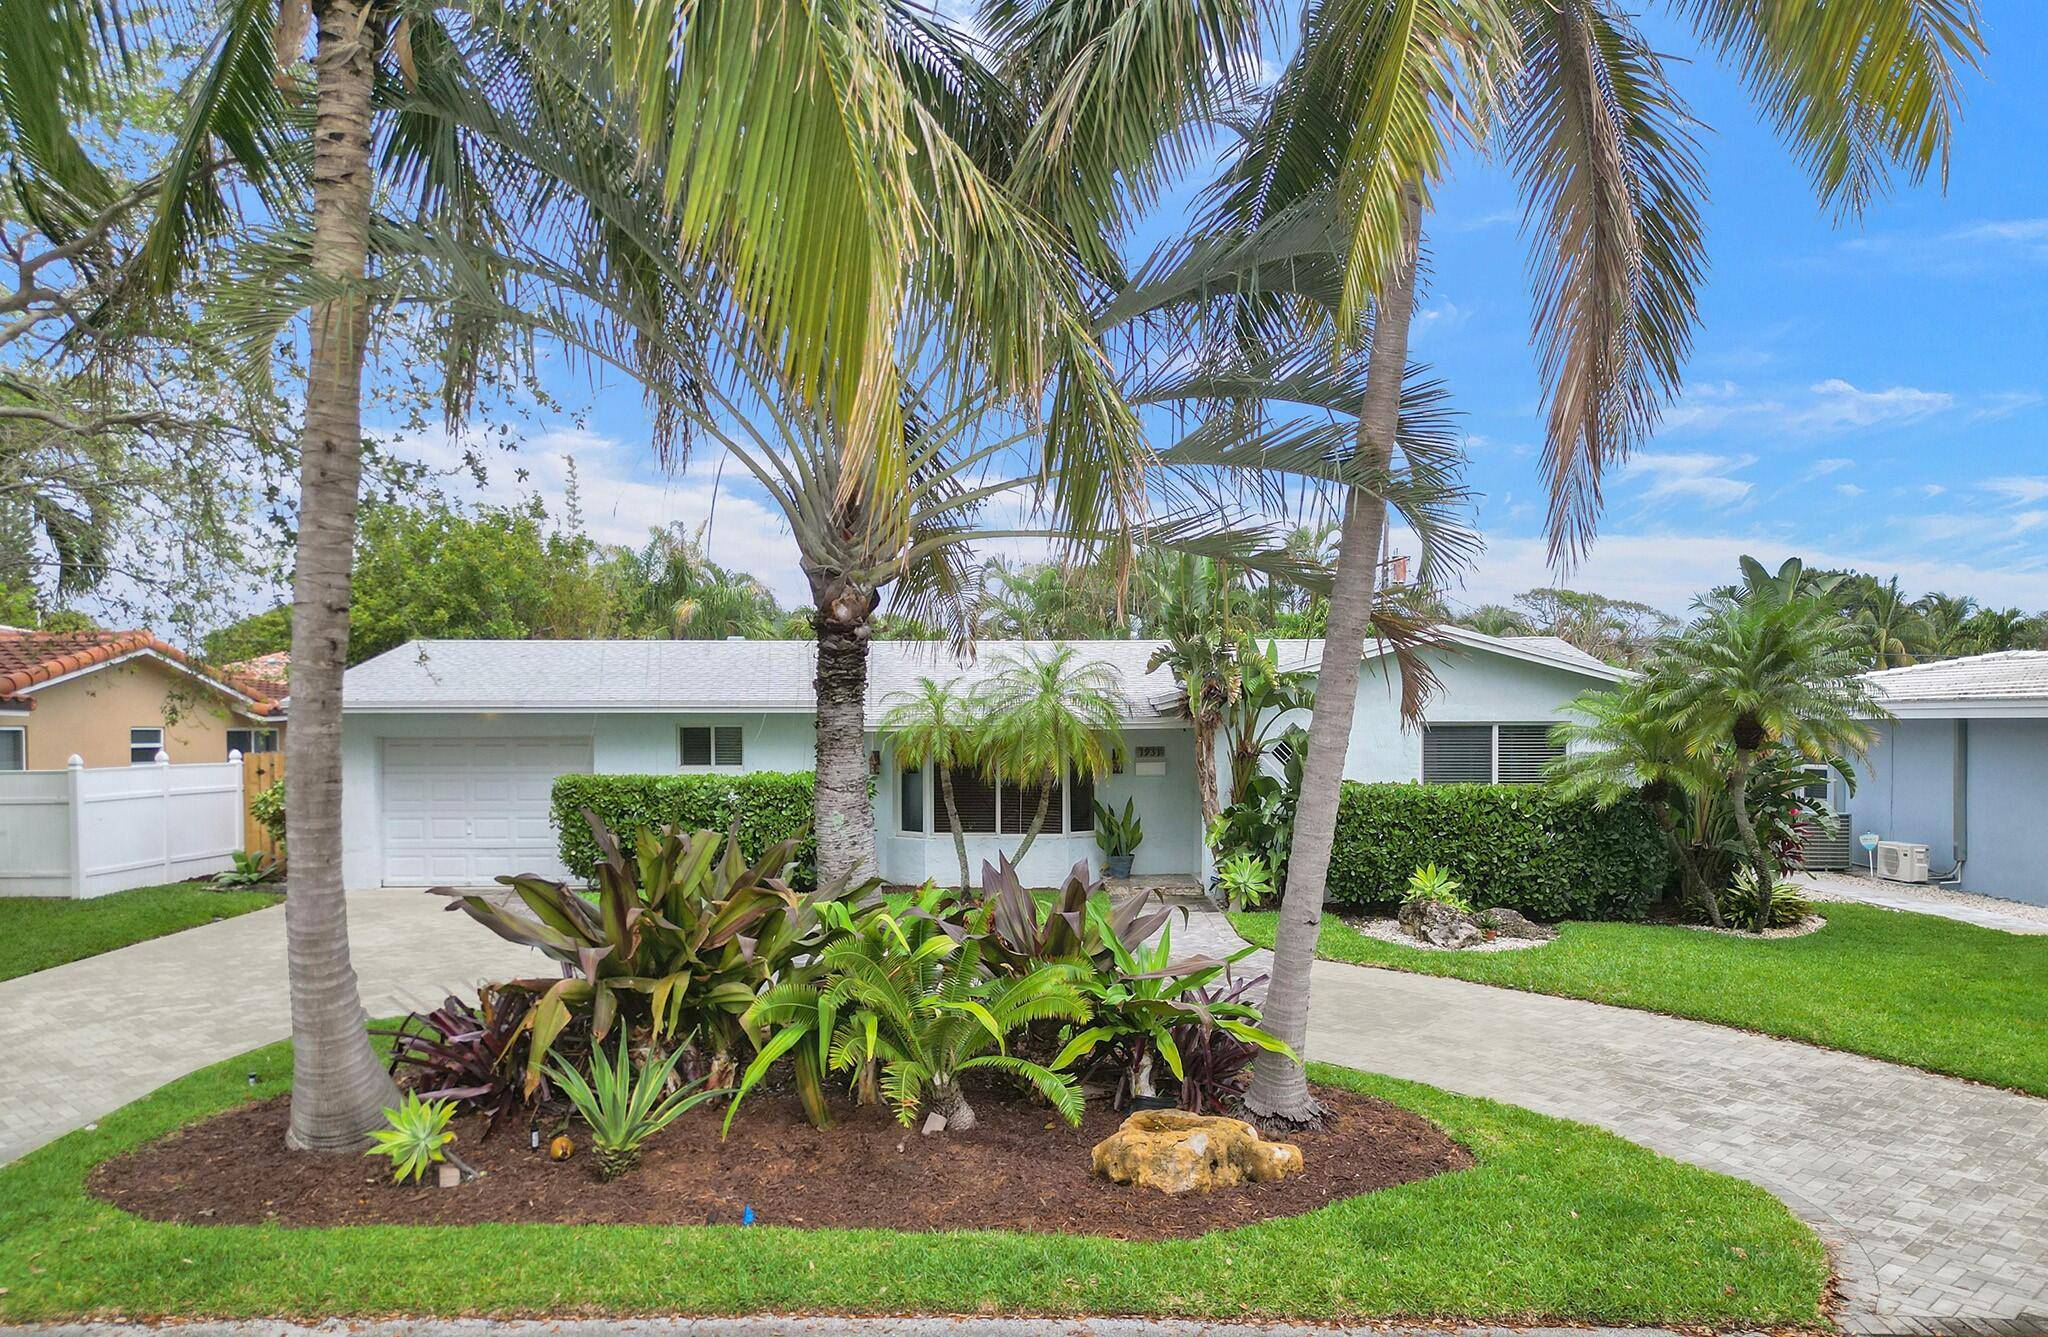 Coastal elegance welcomes you as you step inside this light and bright single family home located on a quiet, oak tree lined street in the heart of prestigious Lighthouse Point.